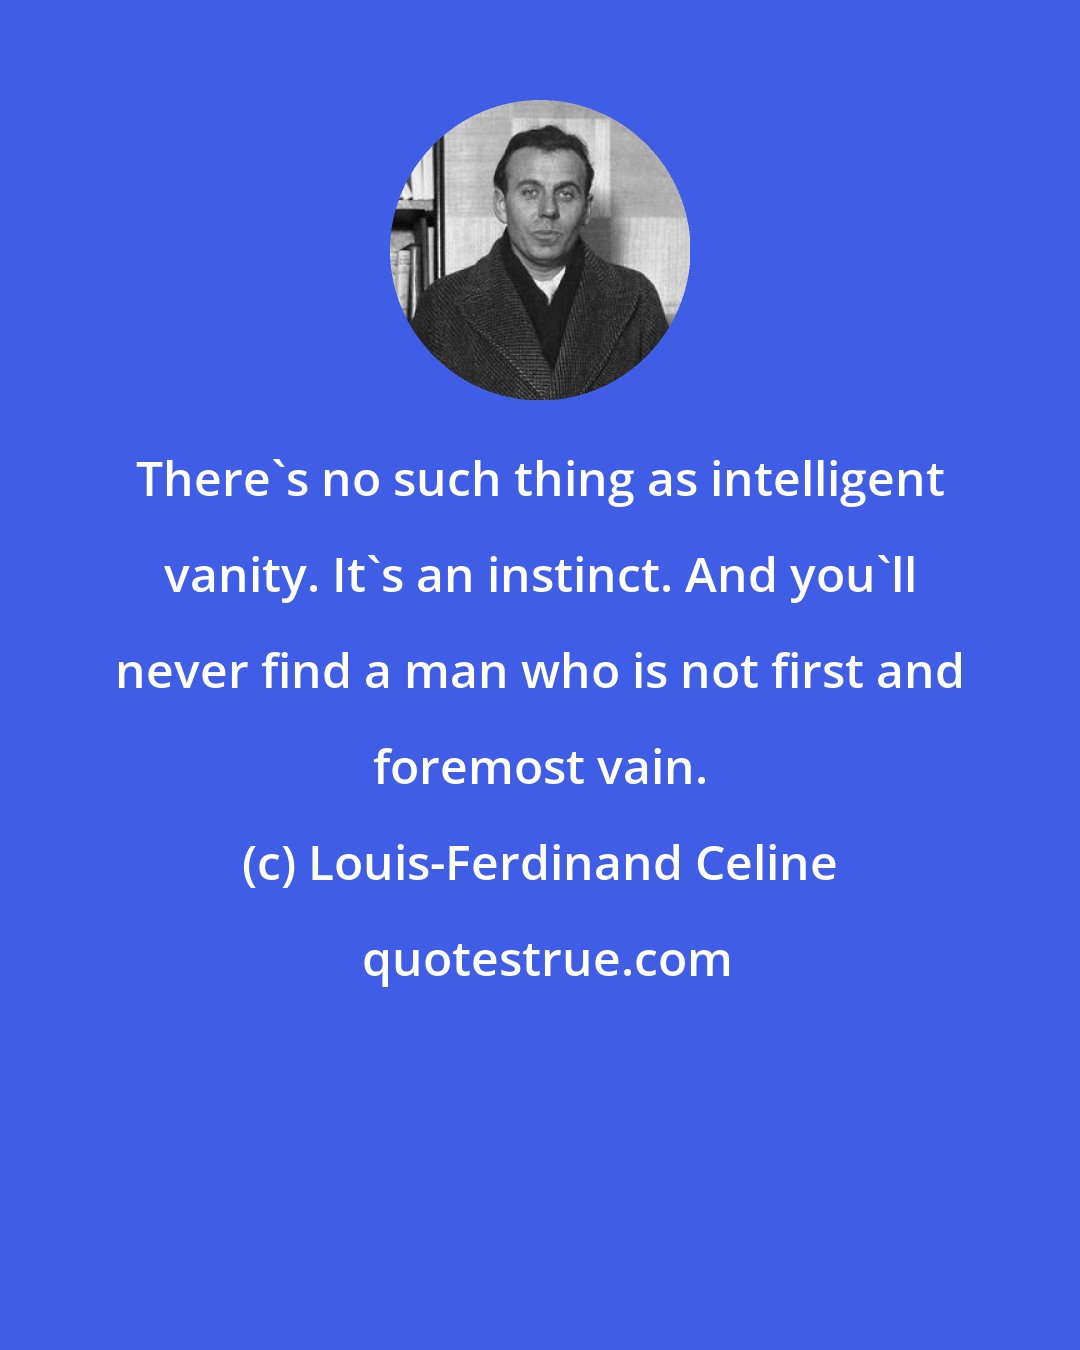 Louis-Ferdinand Celine: There's no such thing as intelligent vanity. It's an instinct. And you'll never find a man who is not first and foremost vain.